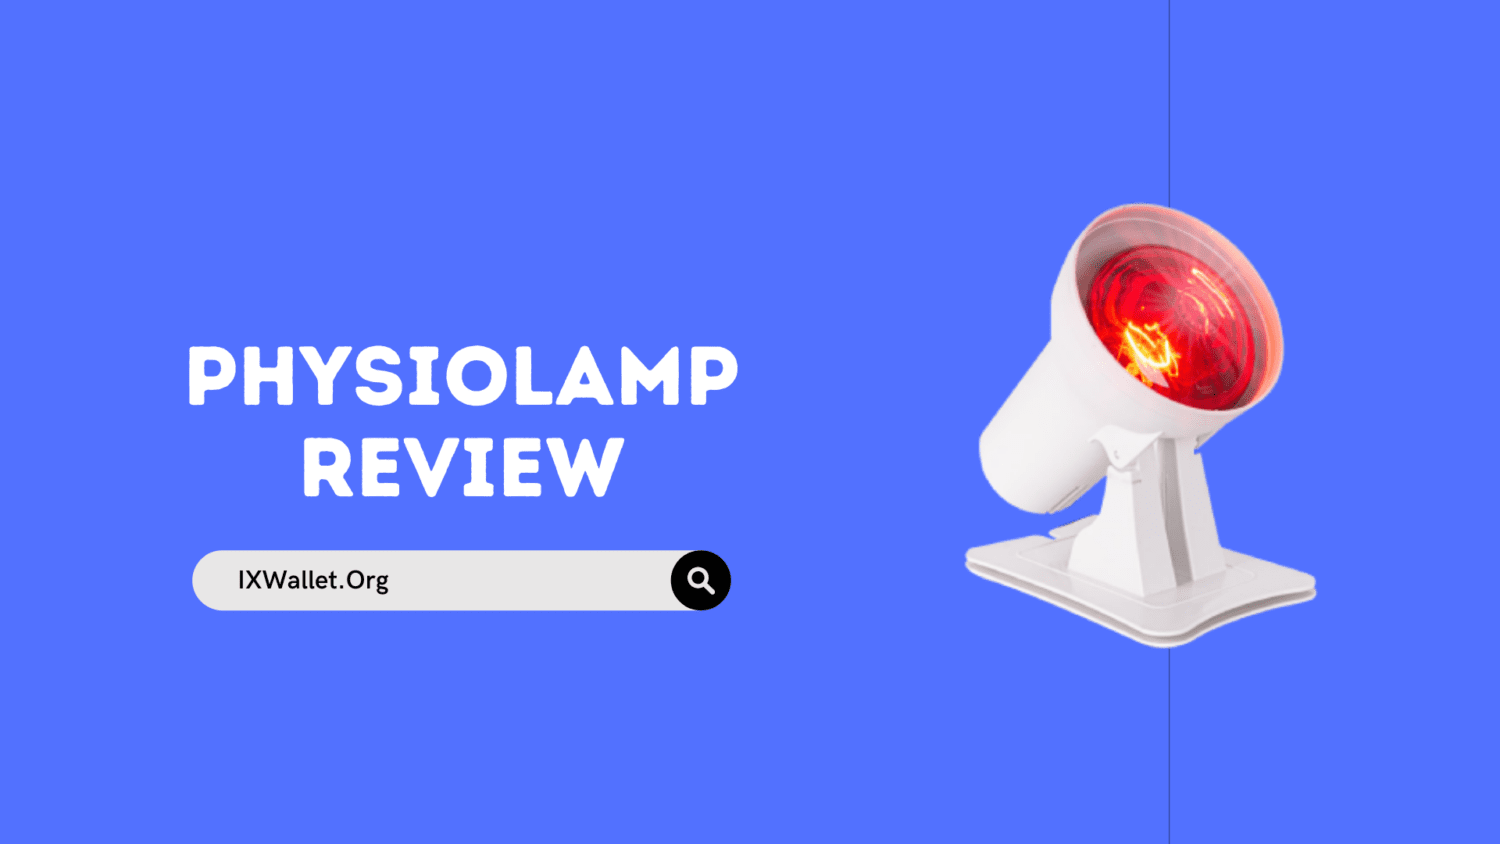 Physiolamp Review: Does It Really Work?